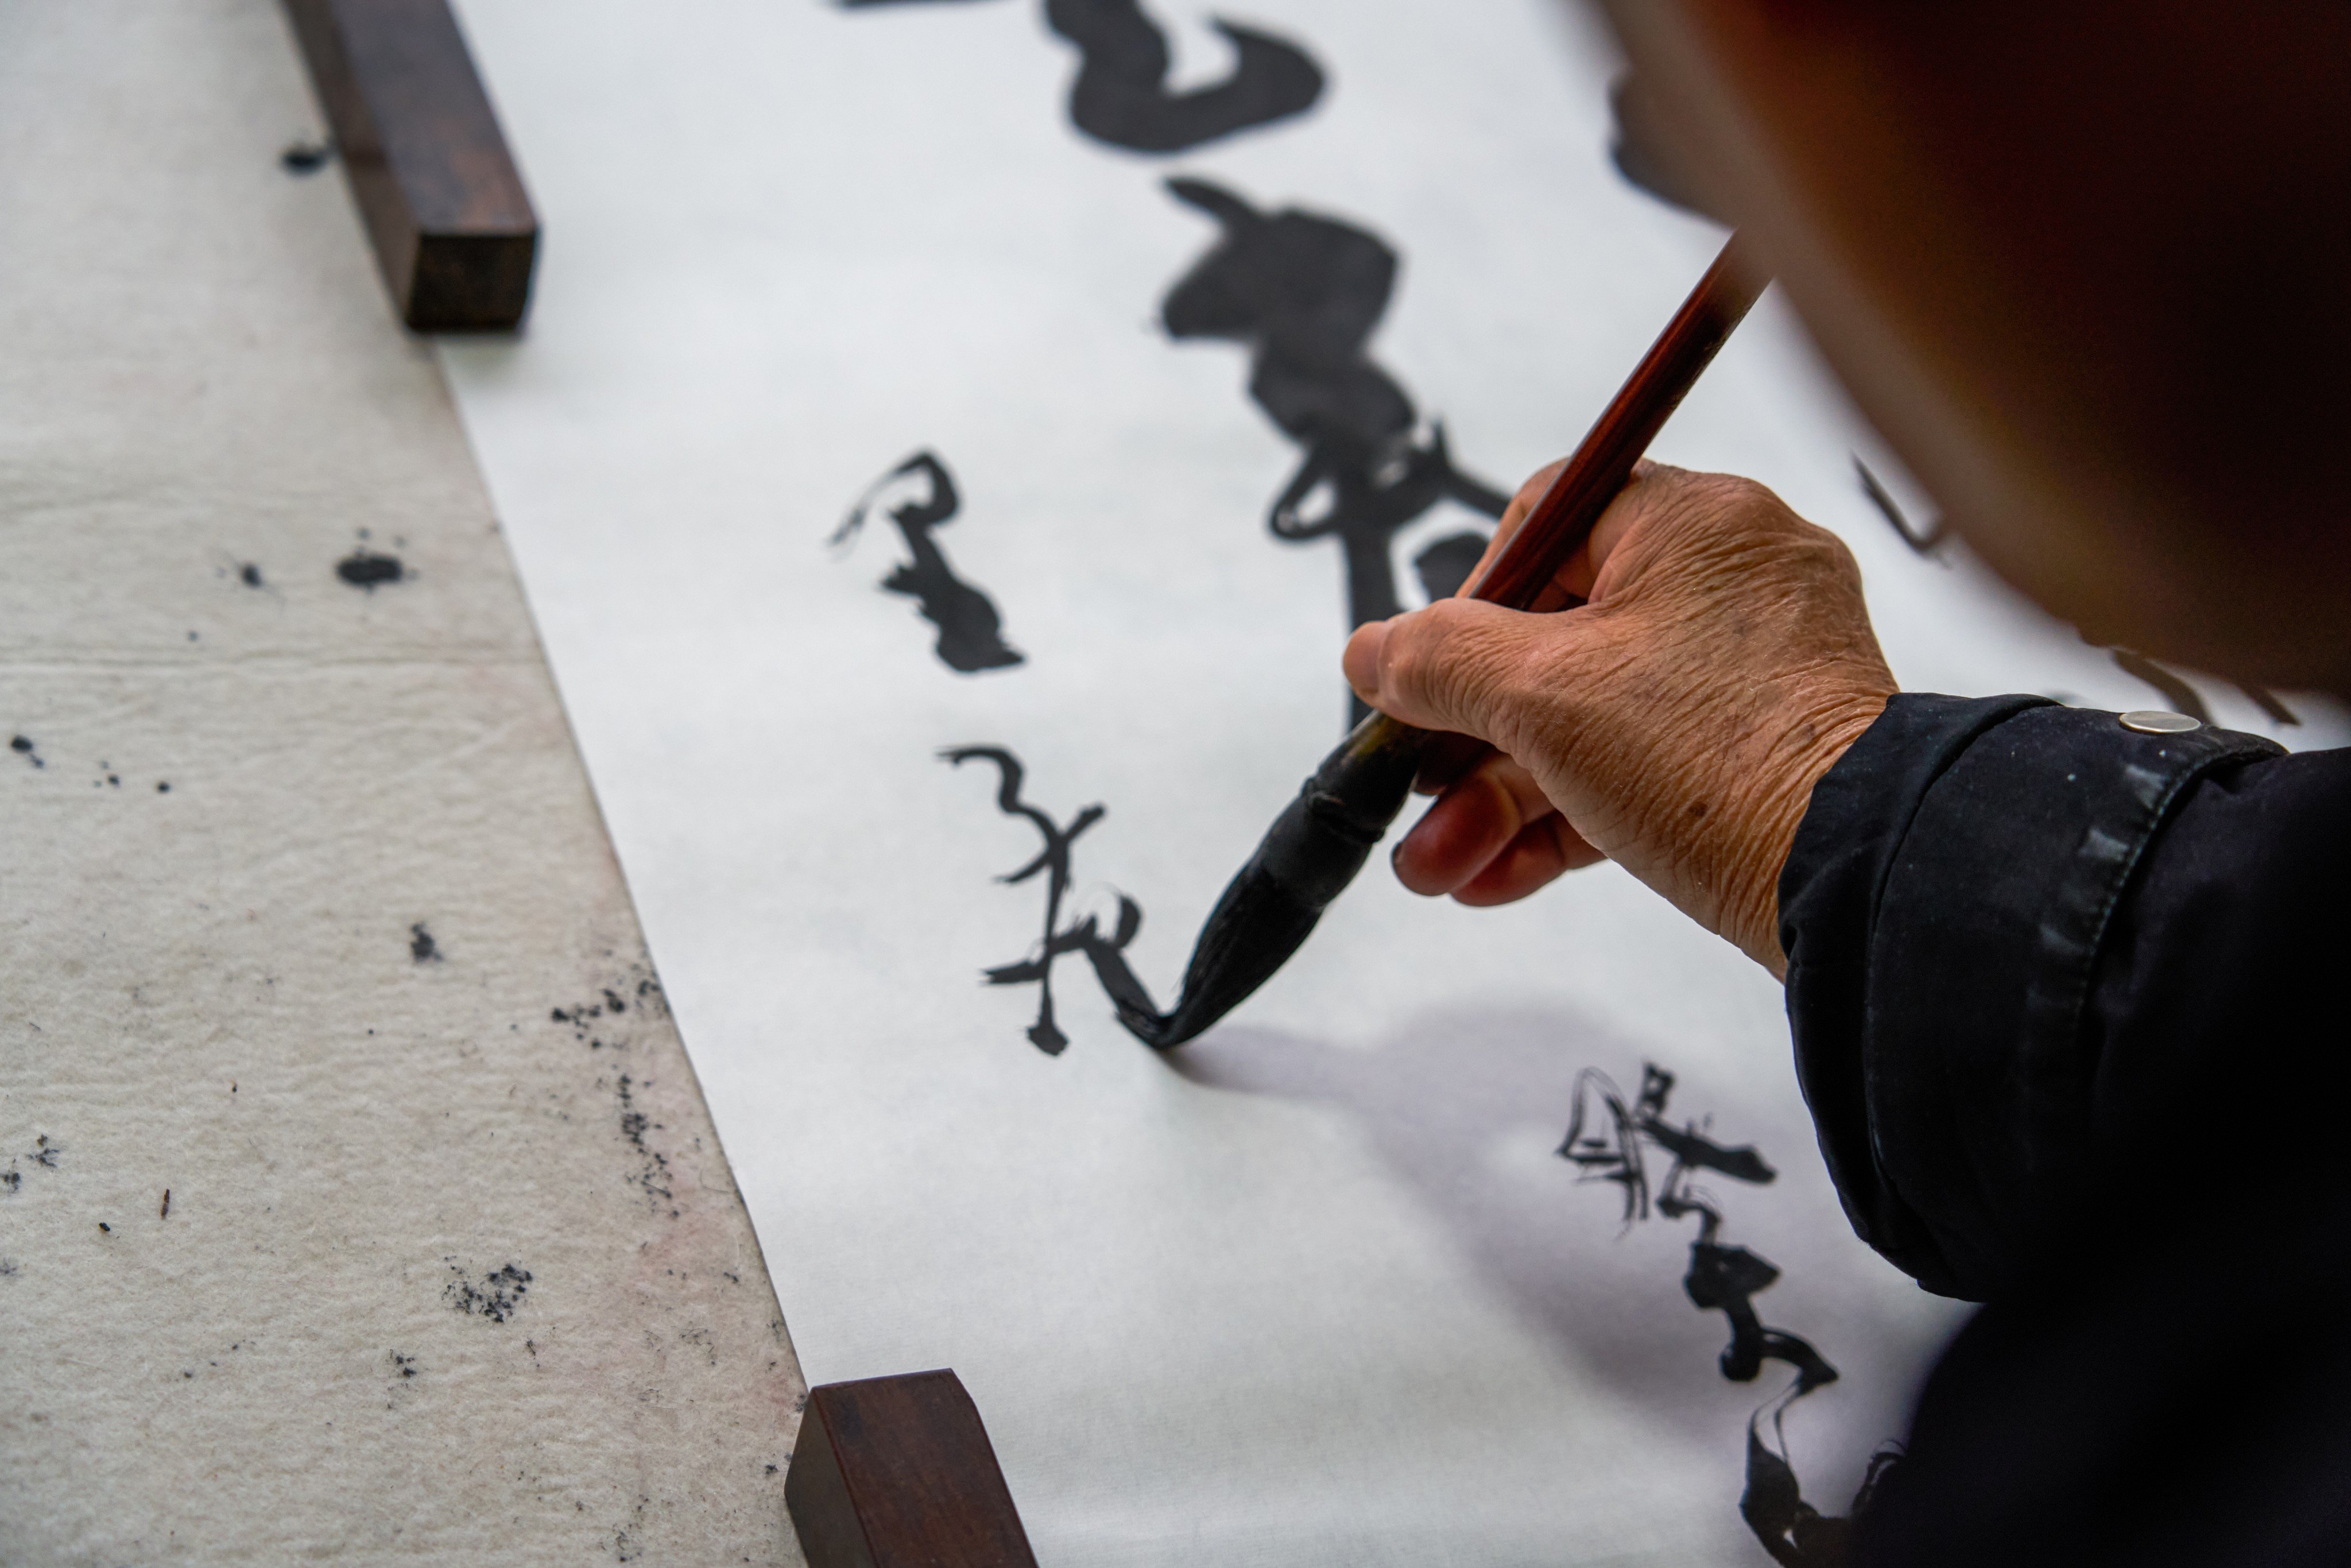 Hong Kong researchers asked half of the participating calligraphy enthusiasts to increase their activity time as part of the study. Photo: Shutterstock